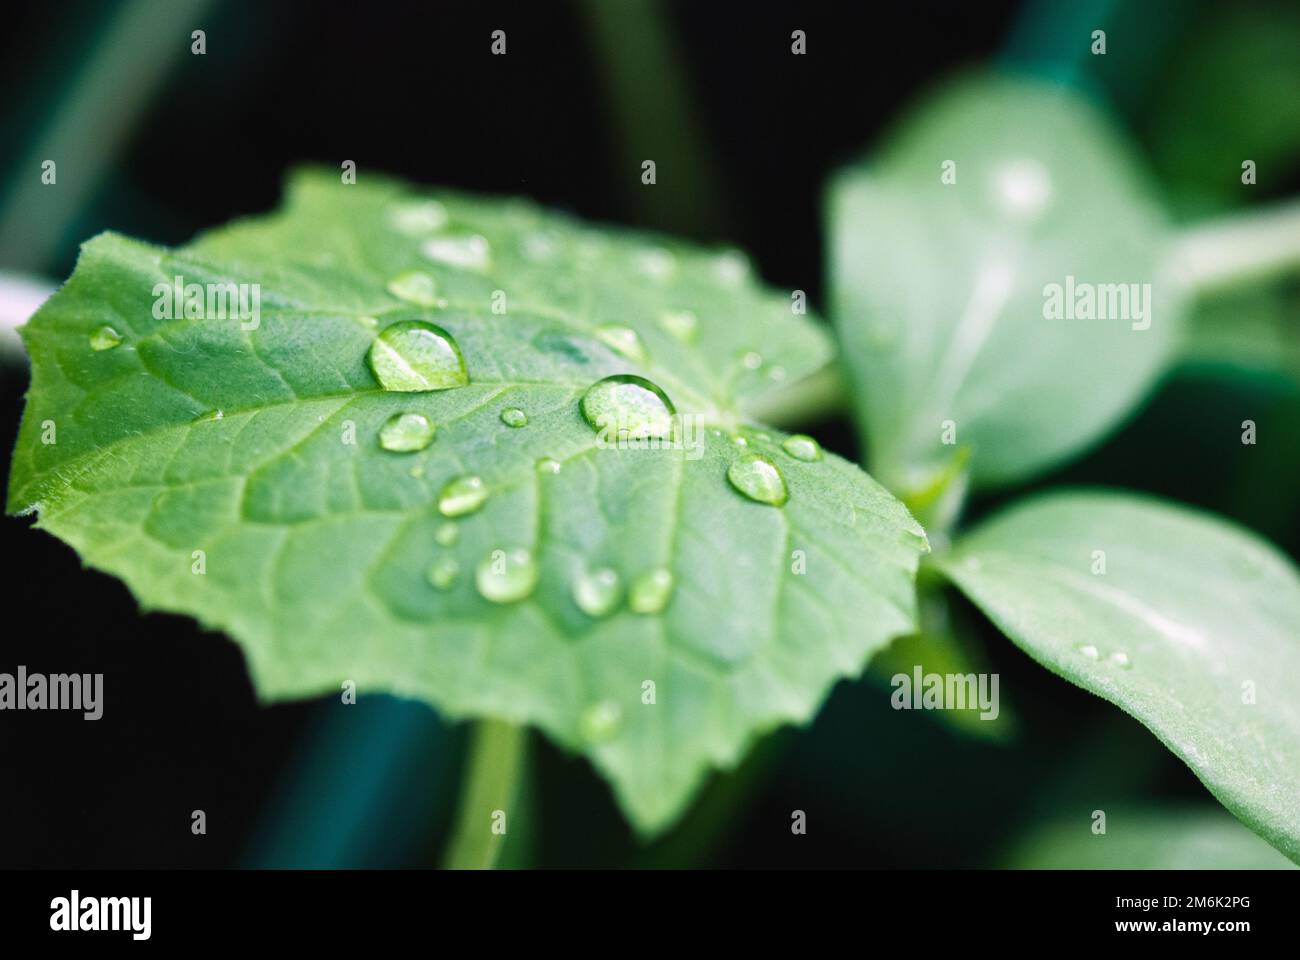 Small pumpkin plant, green leaf with water drops, watering vegetable seedlings indoors Stock Photo